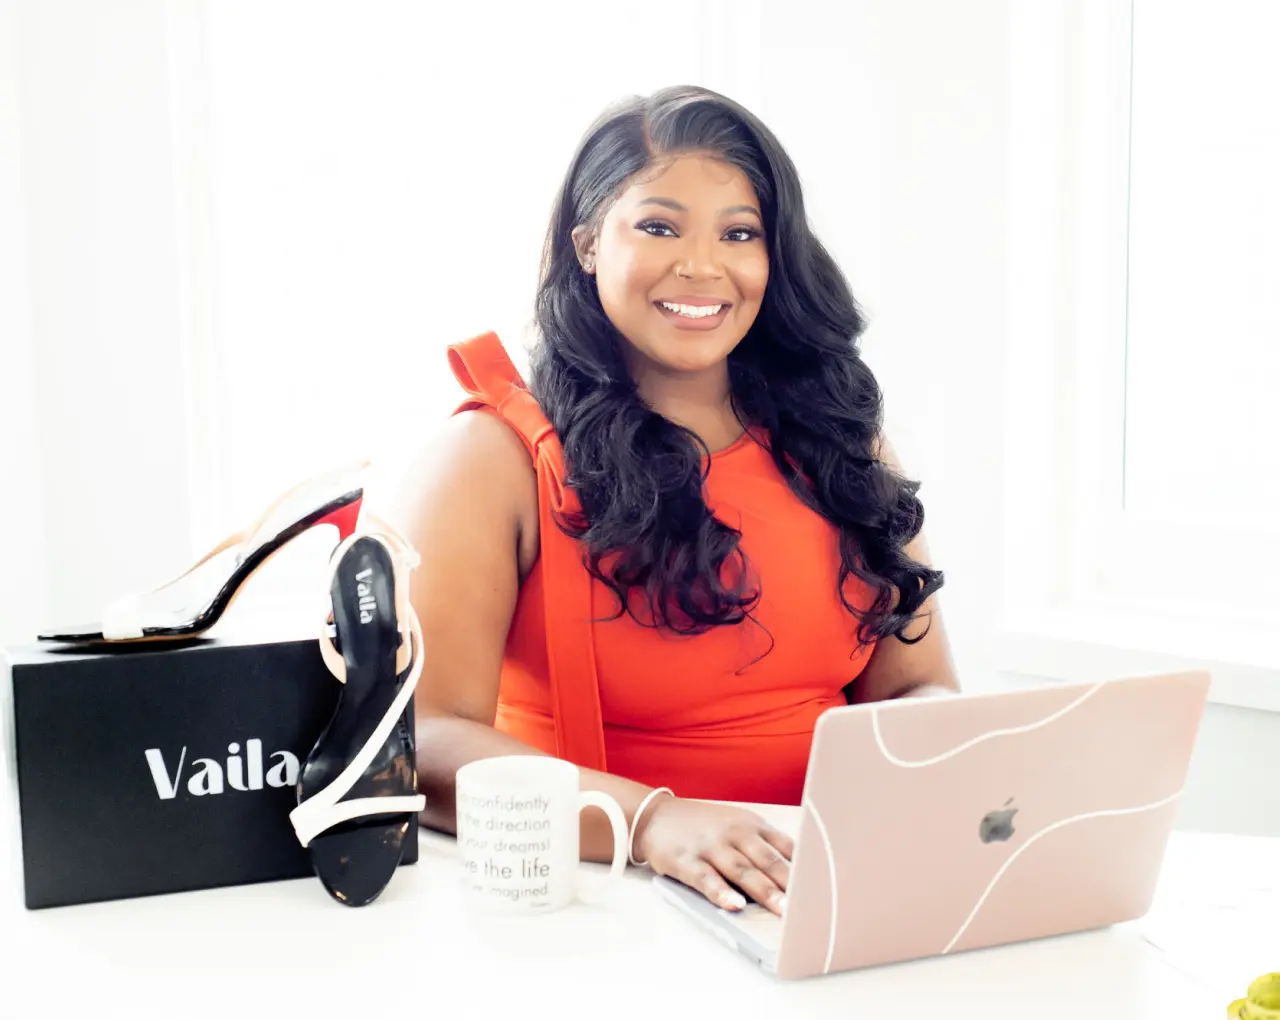 Innovative Partnership with Macy’s Helps Female Entrepreneur Put Her Best Foot Forward